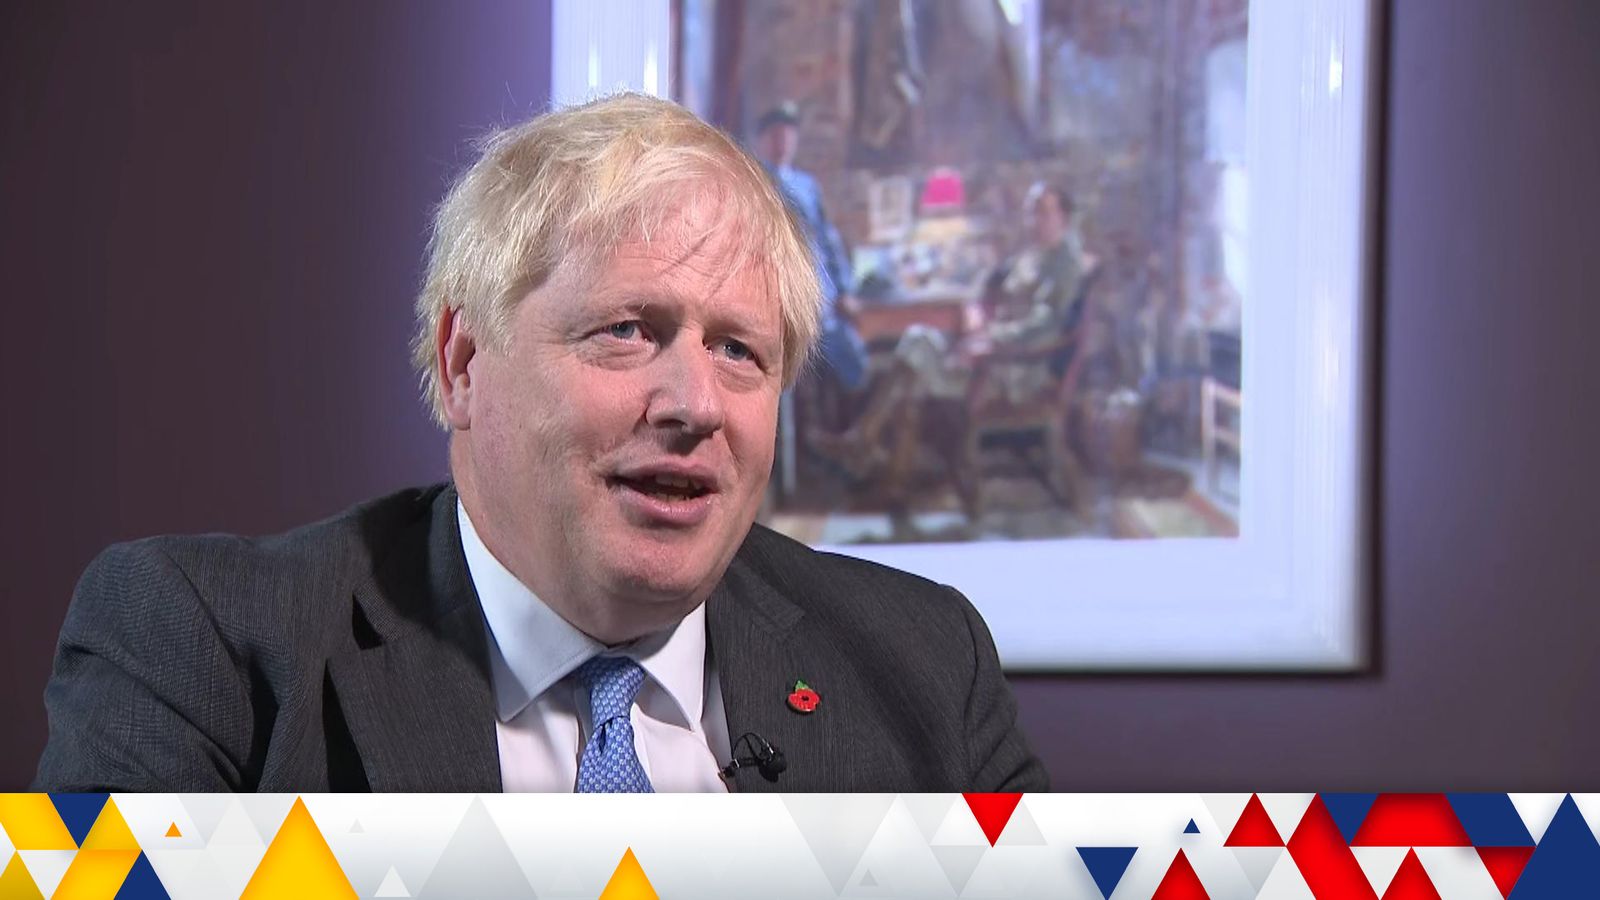 Boris Johnson says Vladimir Putin 'would be crazy' to use tactical nuclear weapon in Ukraine